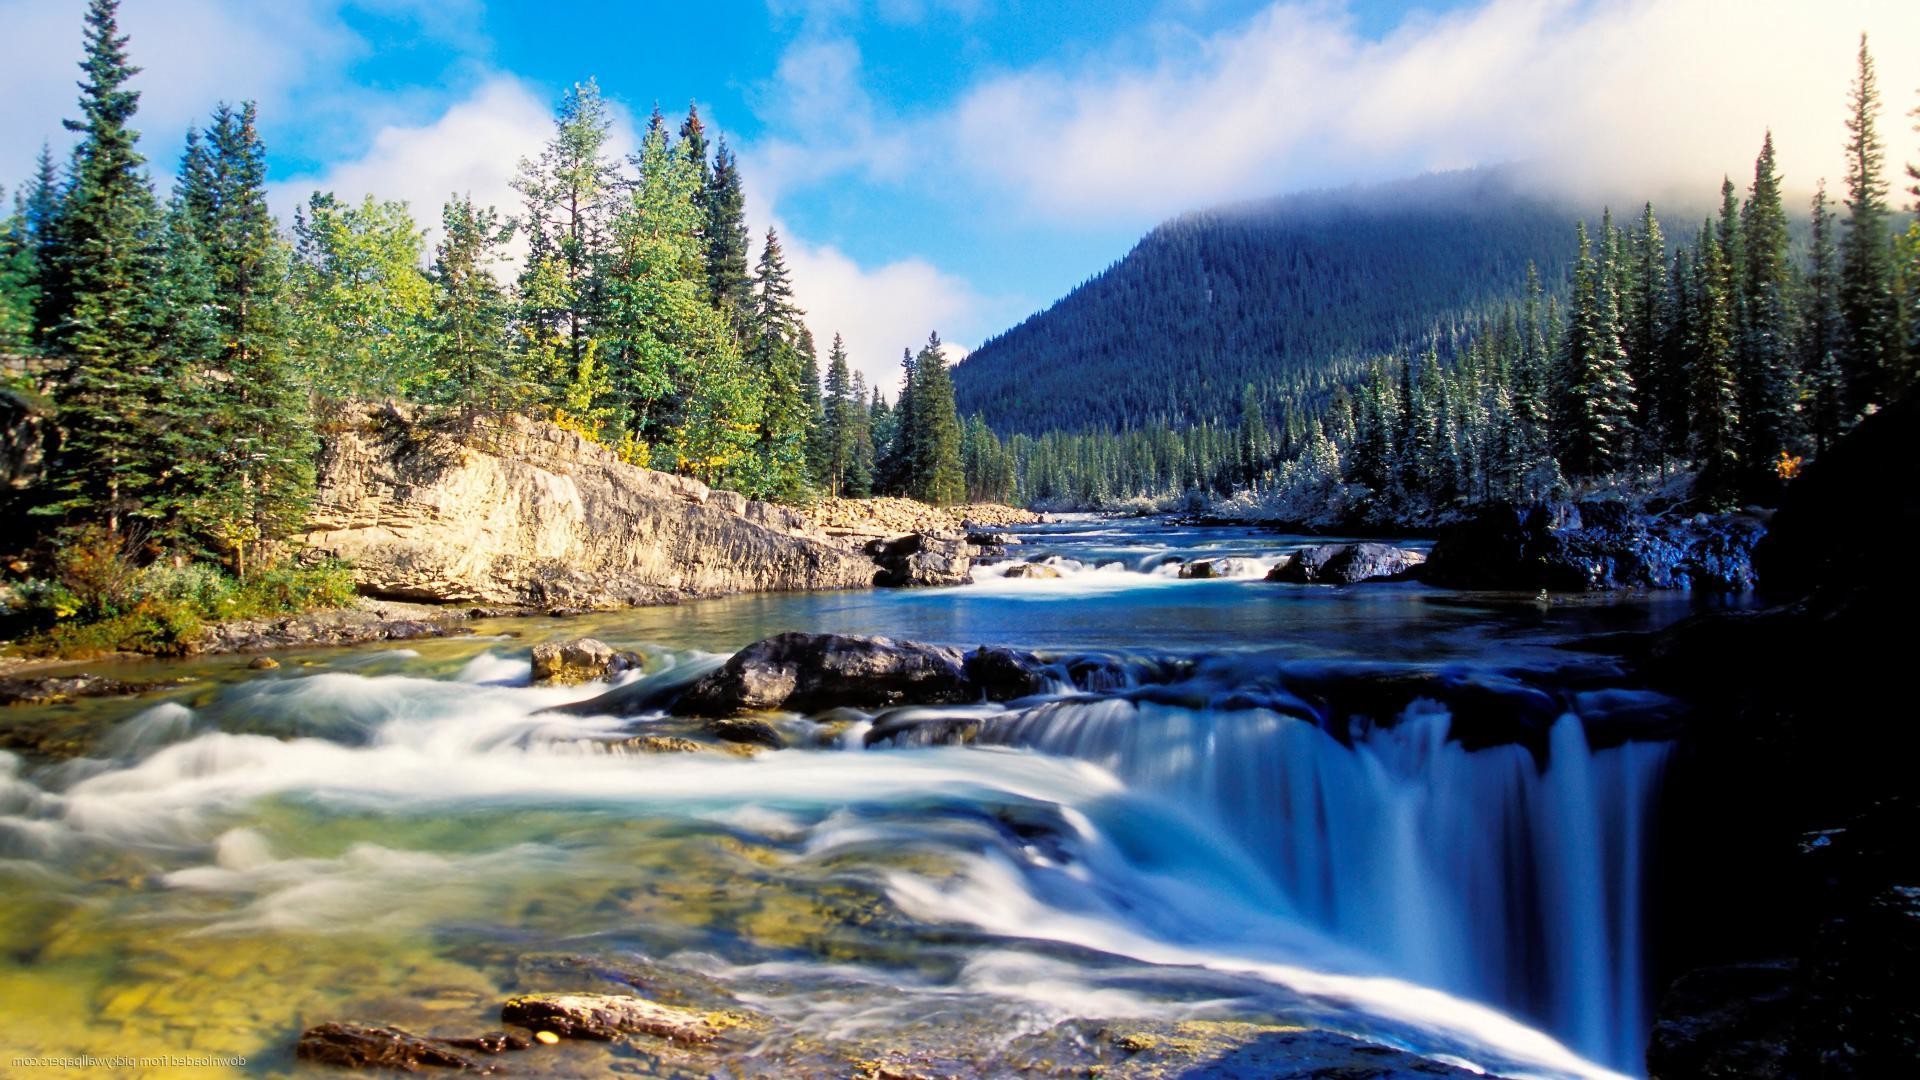 🔥 Download Mountain River At Summer Forest Landscape Wallpaper By